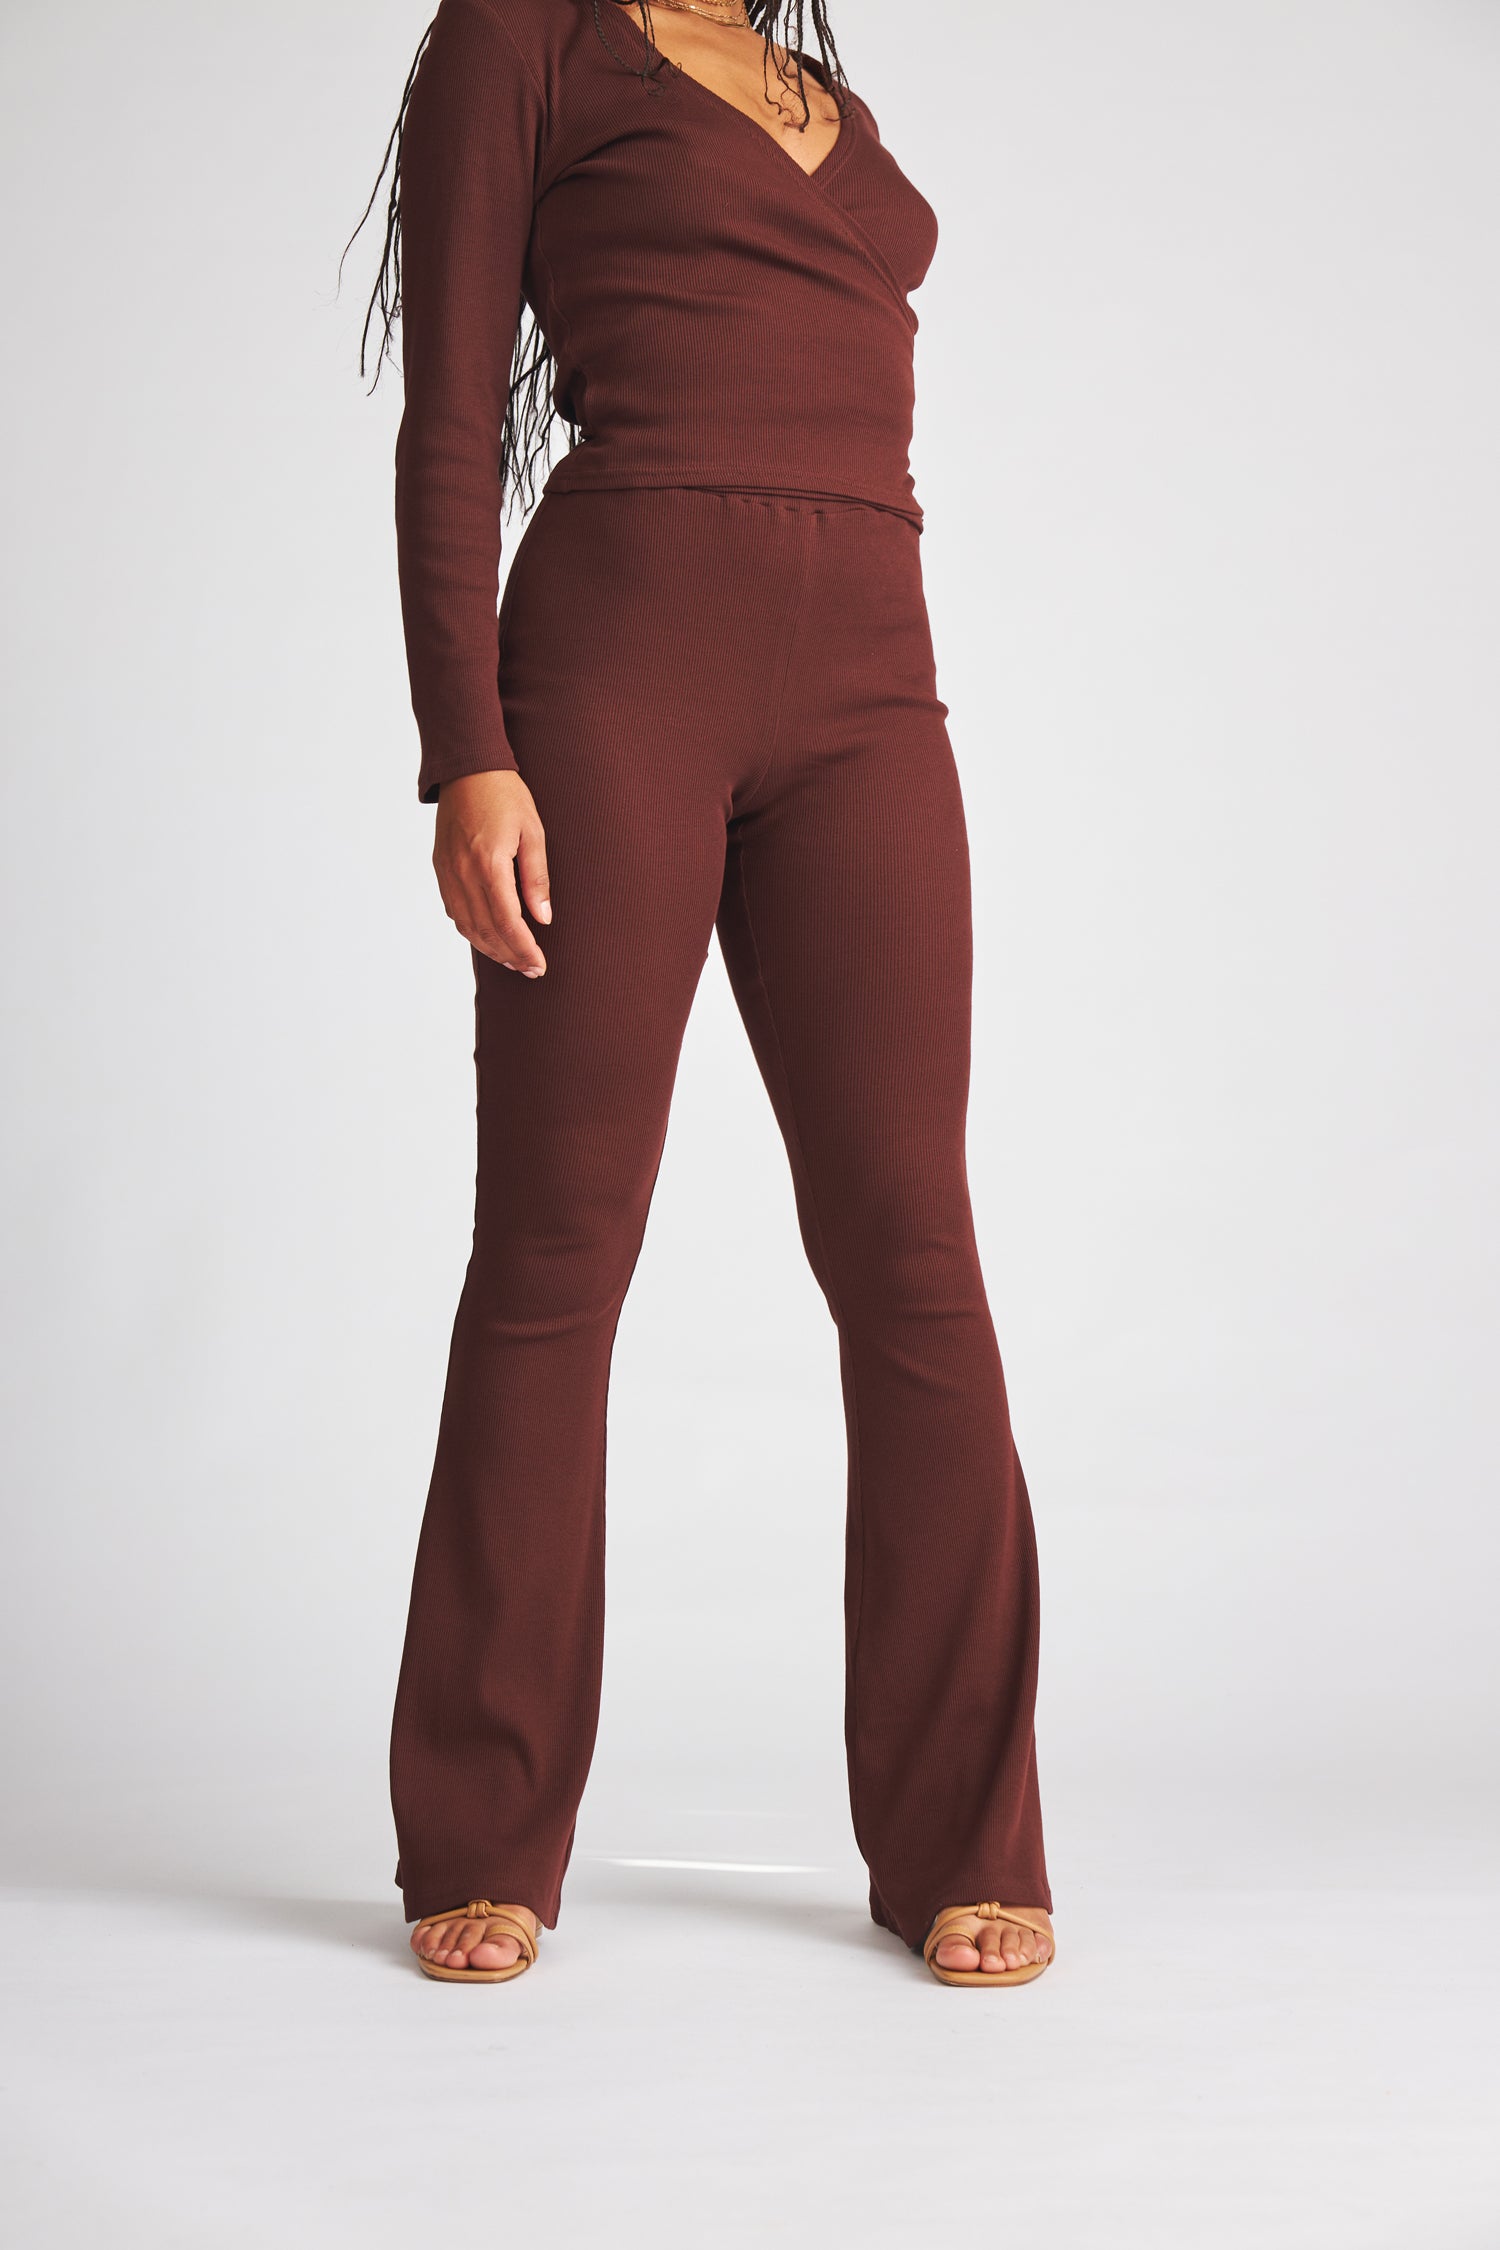 Brown Bailey pants made of organic cotton from Baige the Label